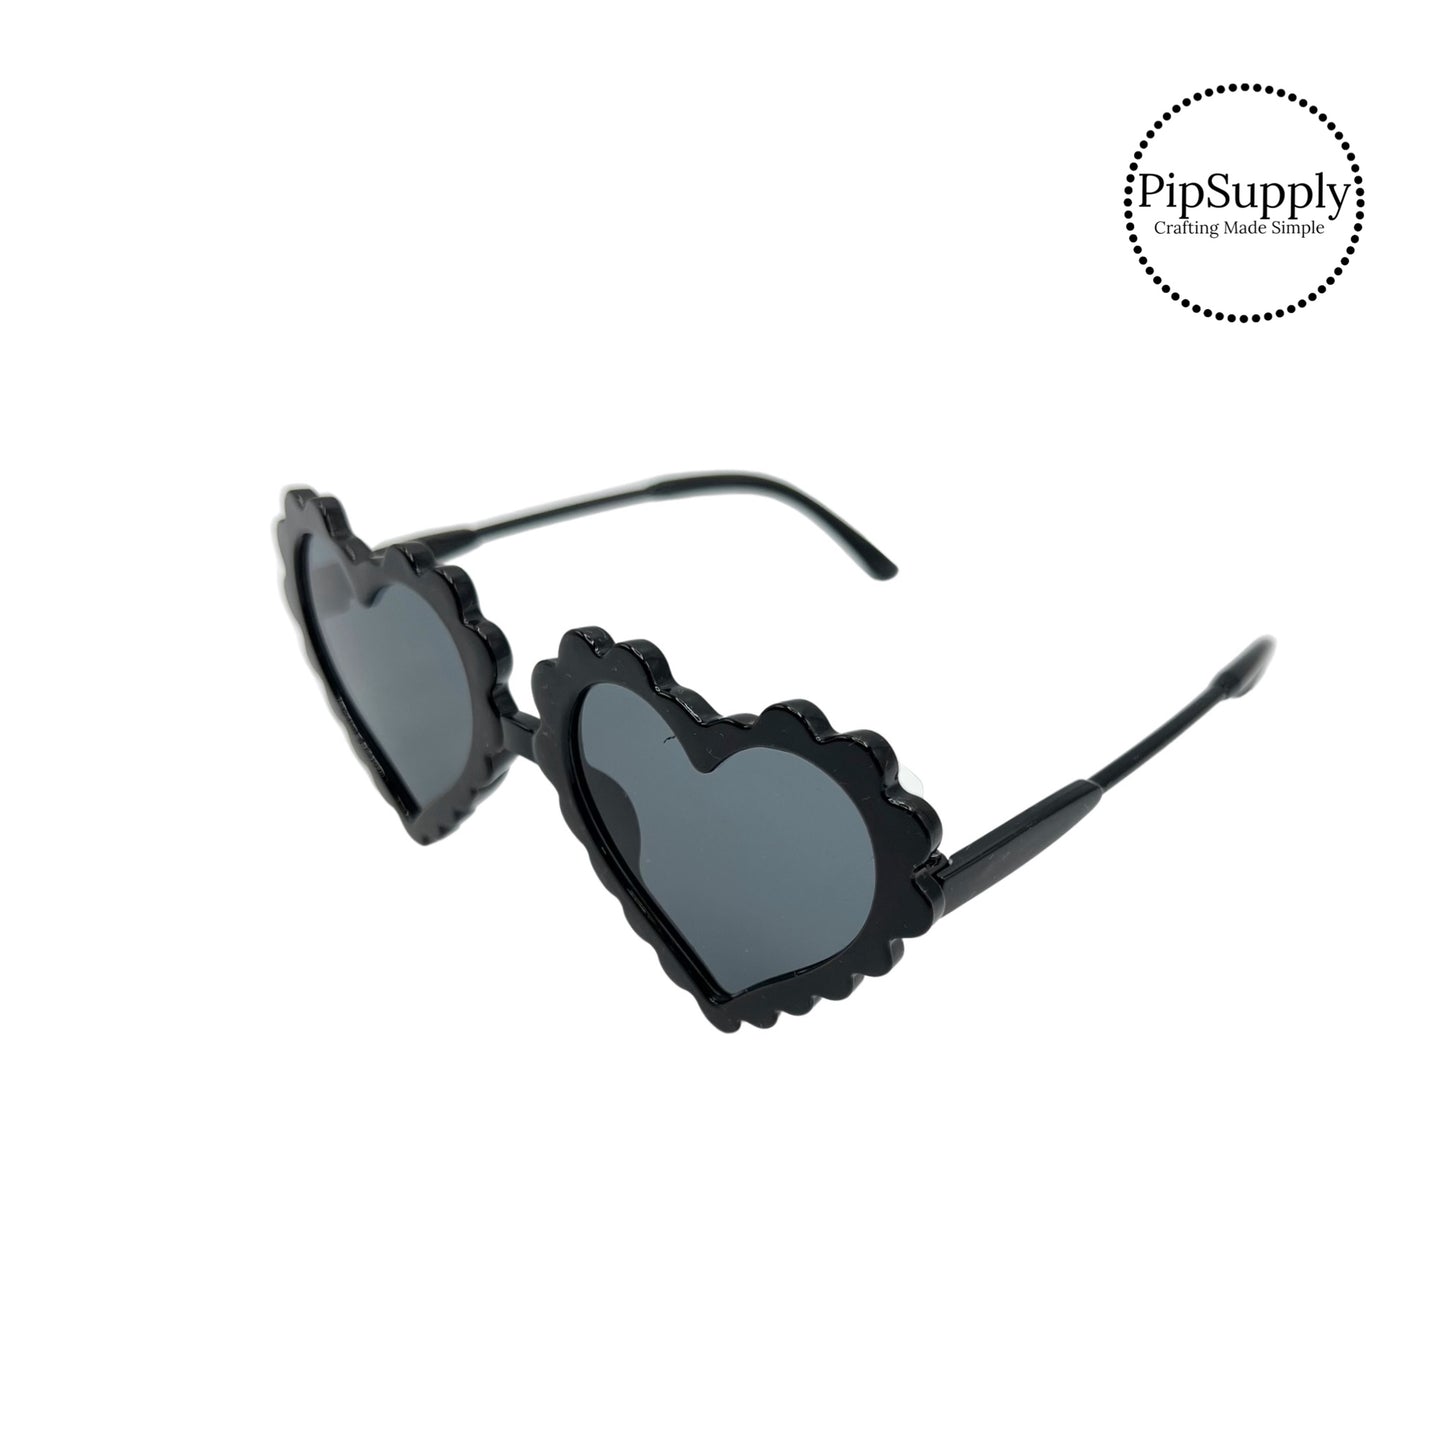 Black heart lenses with black scalloped edges with black temples sunglasses